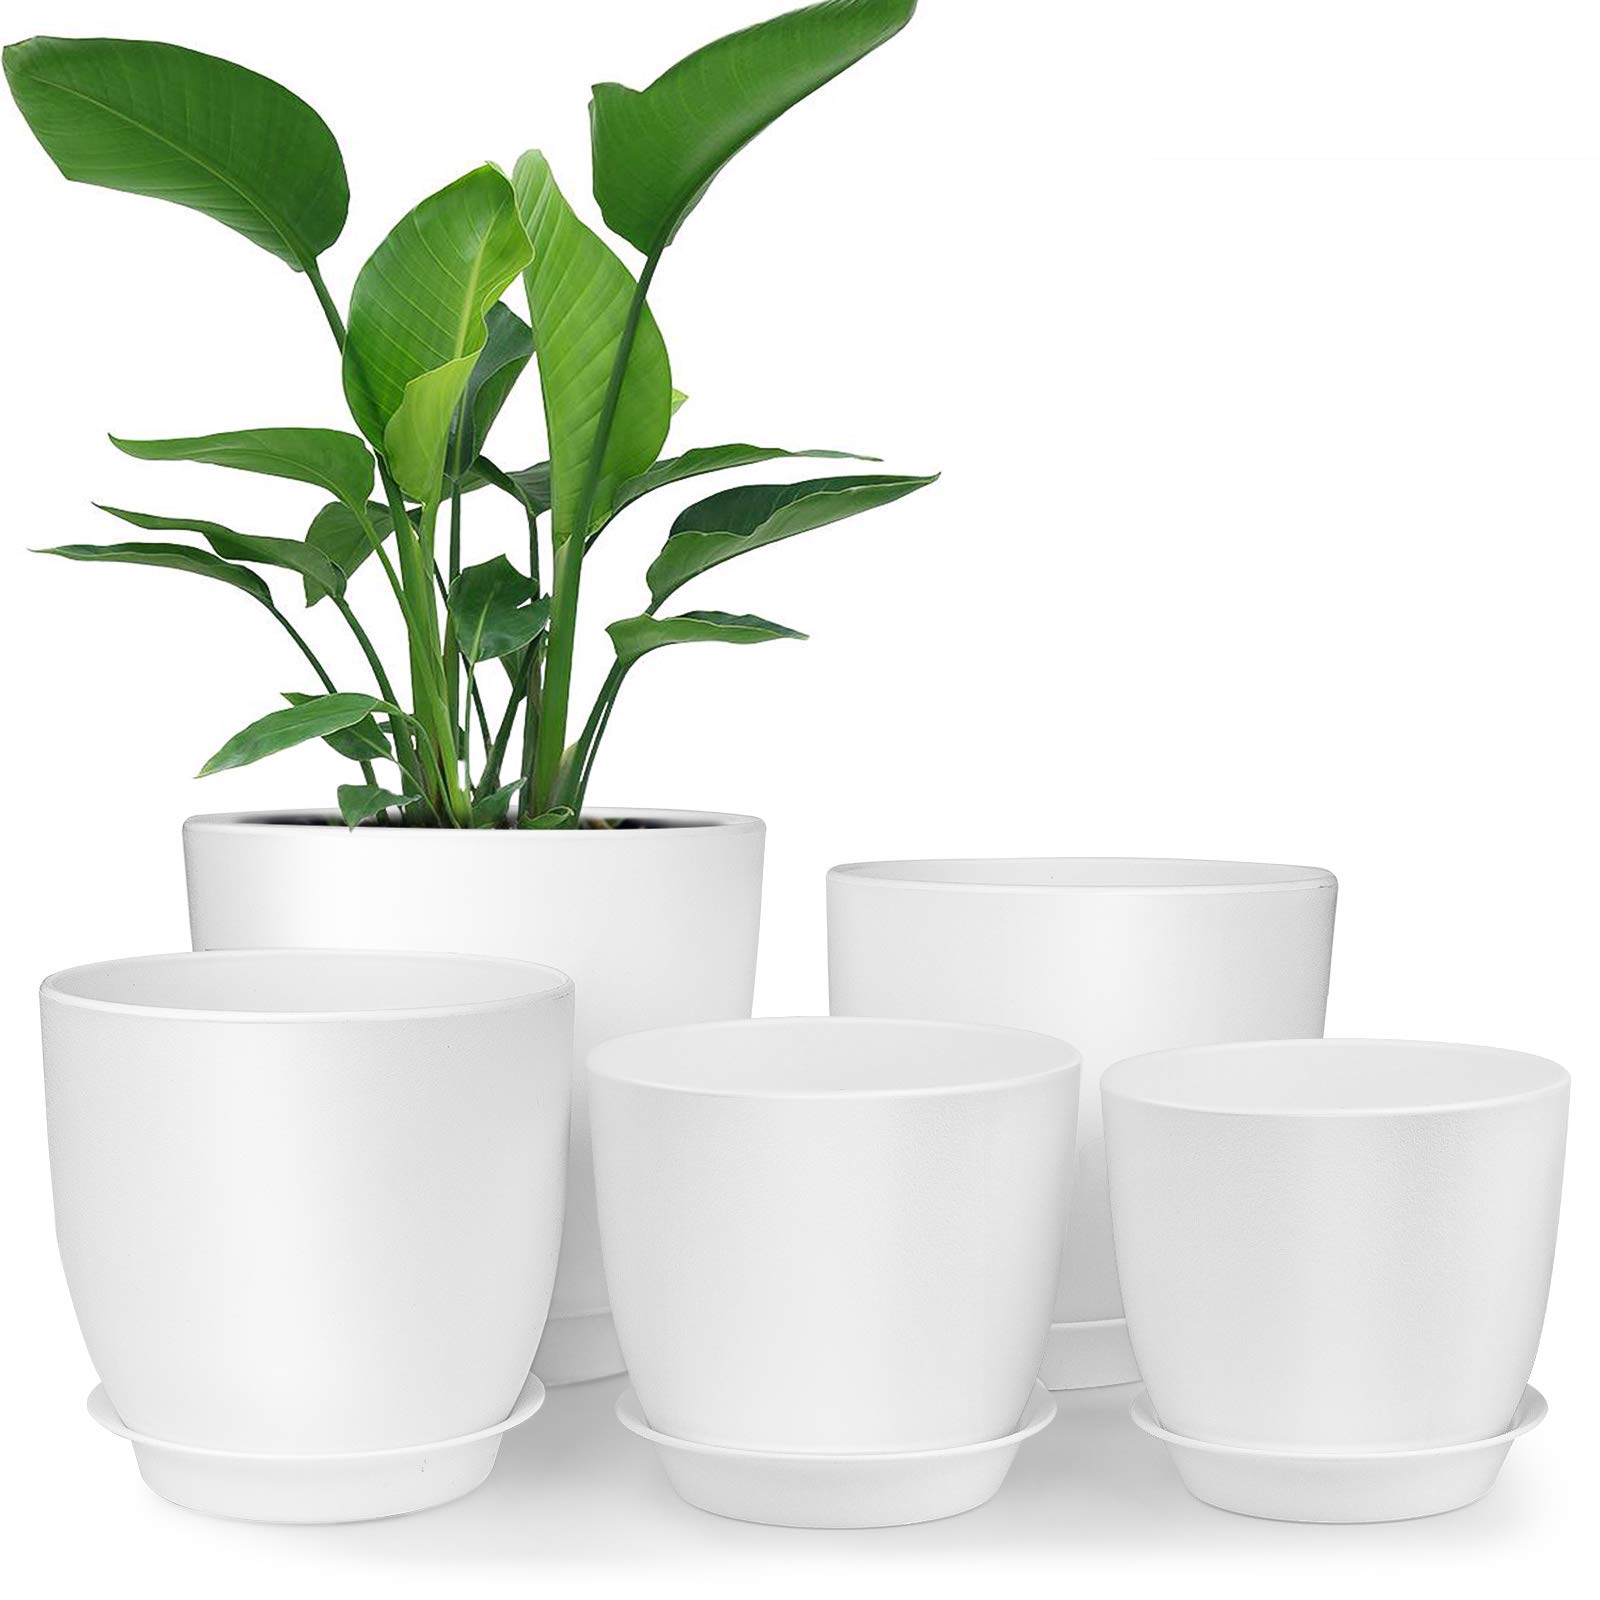 Plastic Planter Flower Pot Indoor Modern Decor with Drainage Hole and Tray